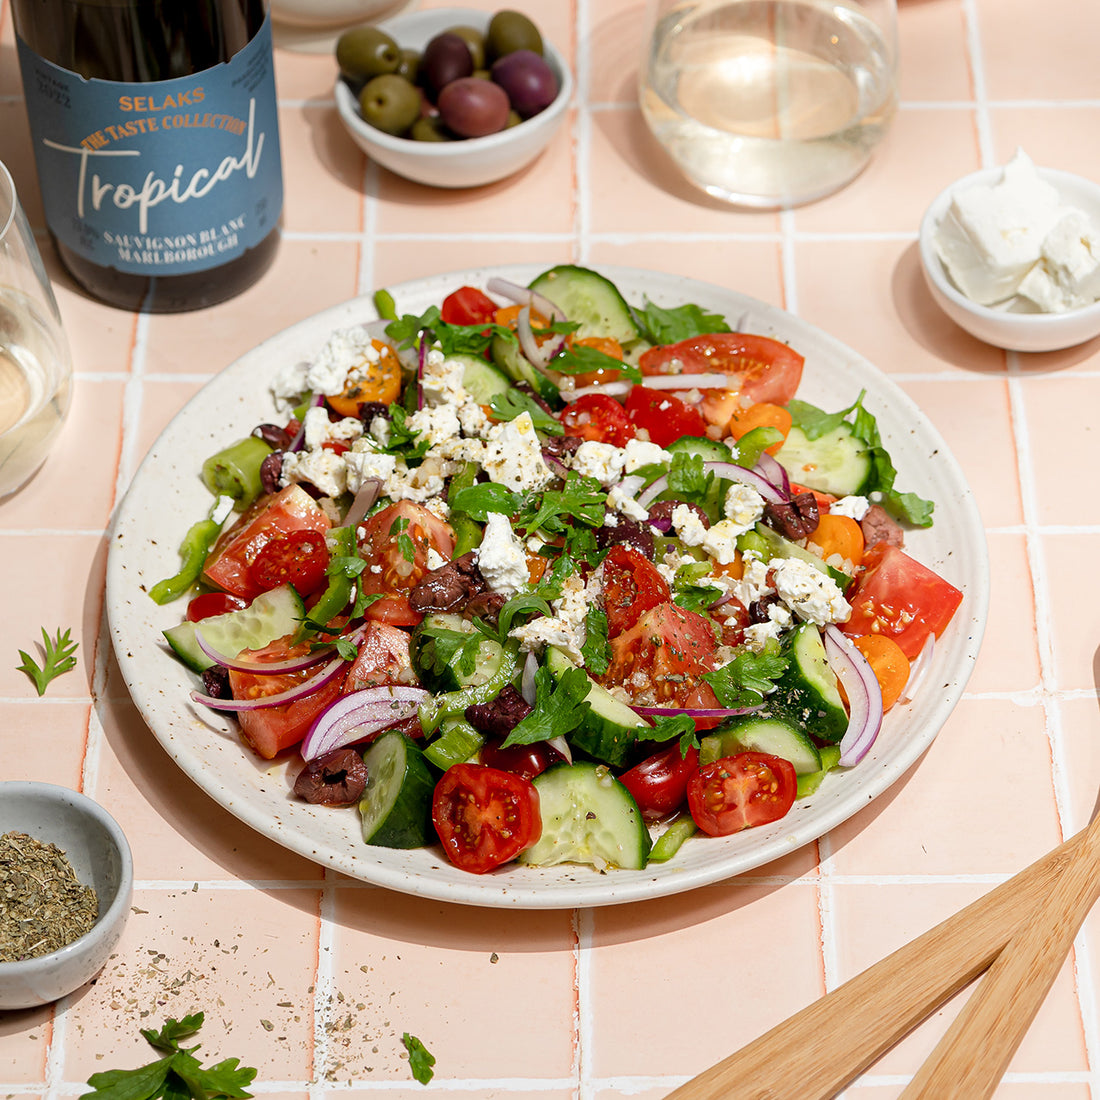 Greek-inspired salad Paired Perfectly with Selaks The Taste Collection Tropical Sauvignon Blanc